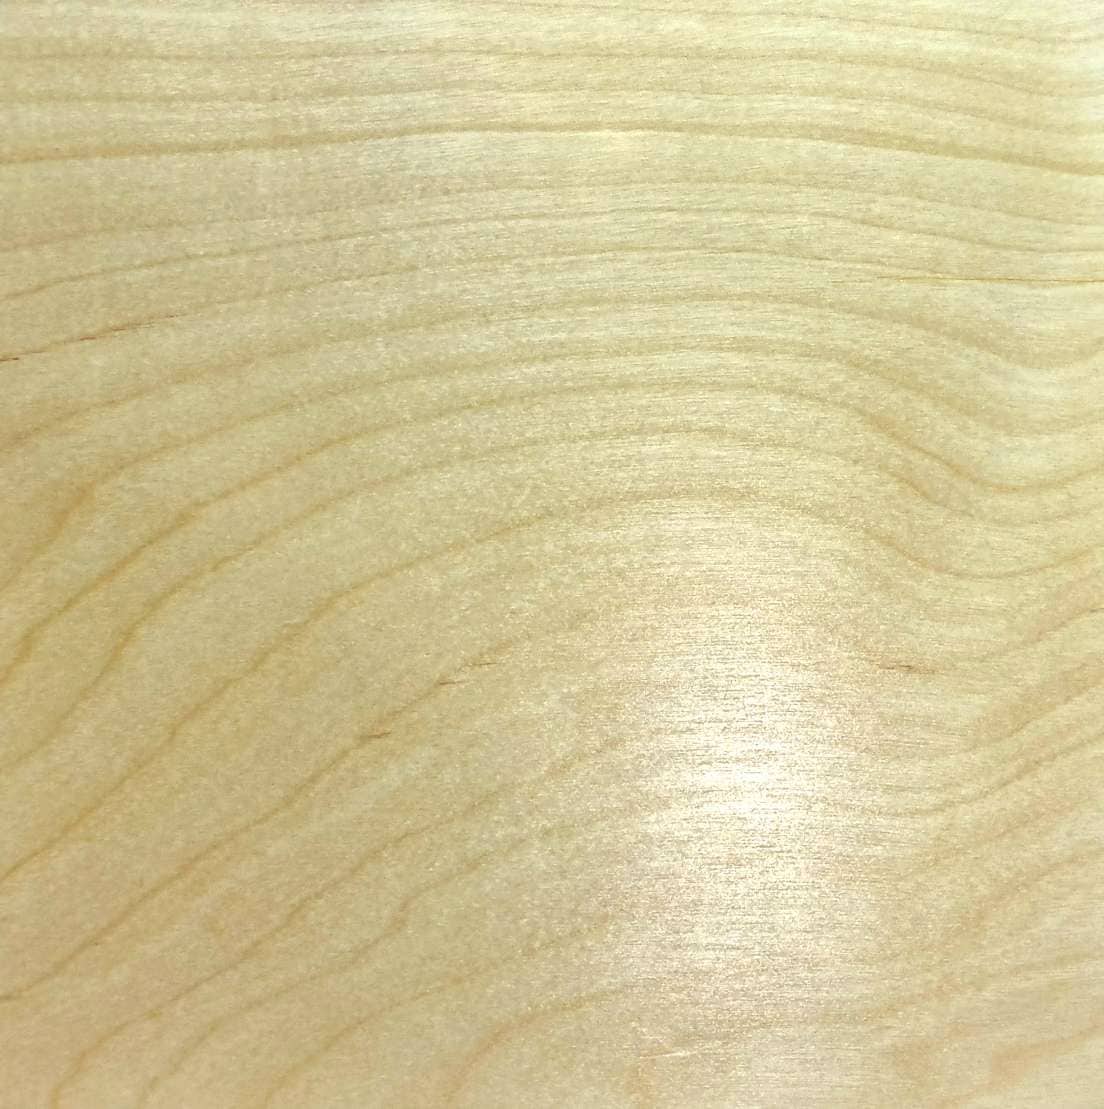 Maple Prefinished Plywood 4Ft X 8Ft (Domestic Plywood)